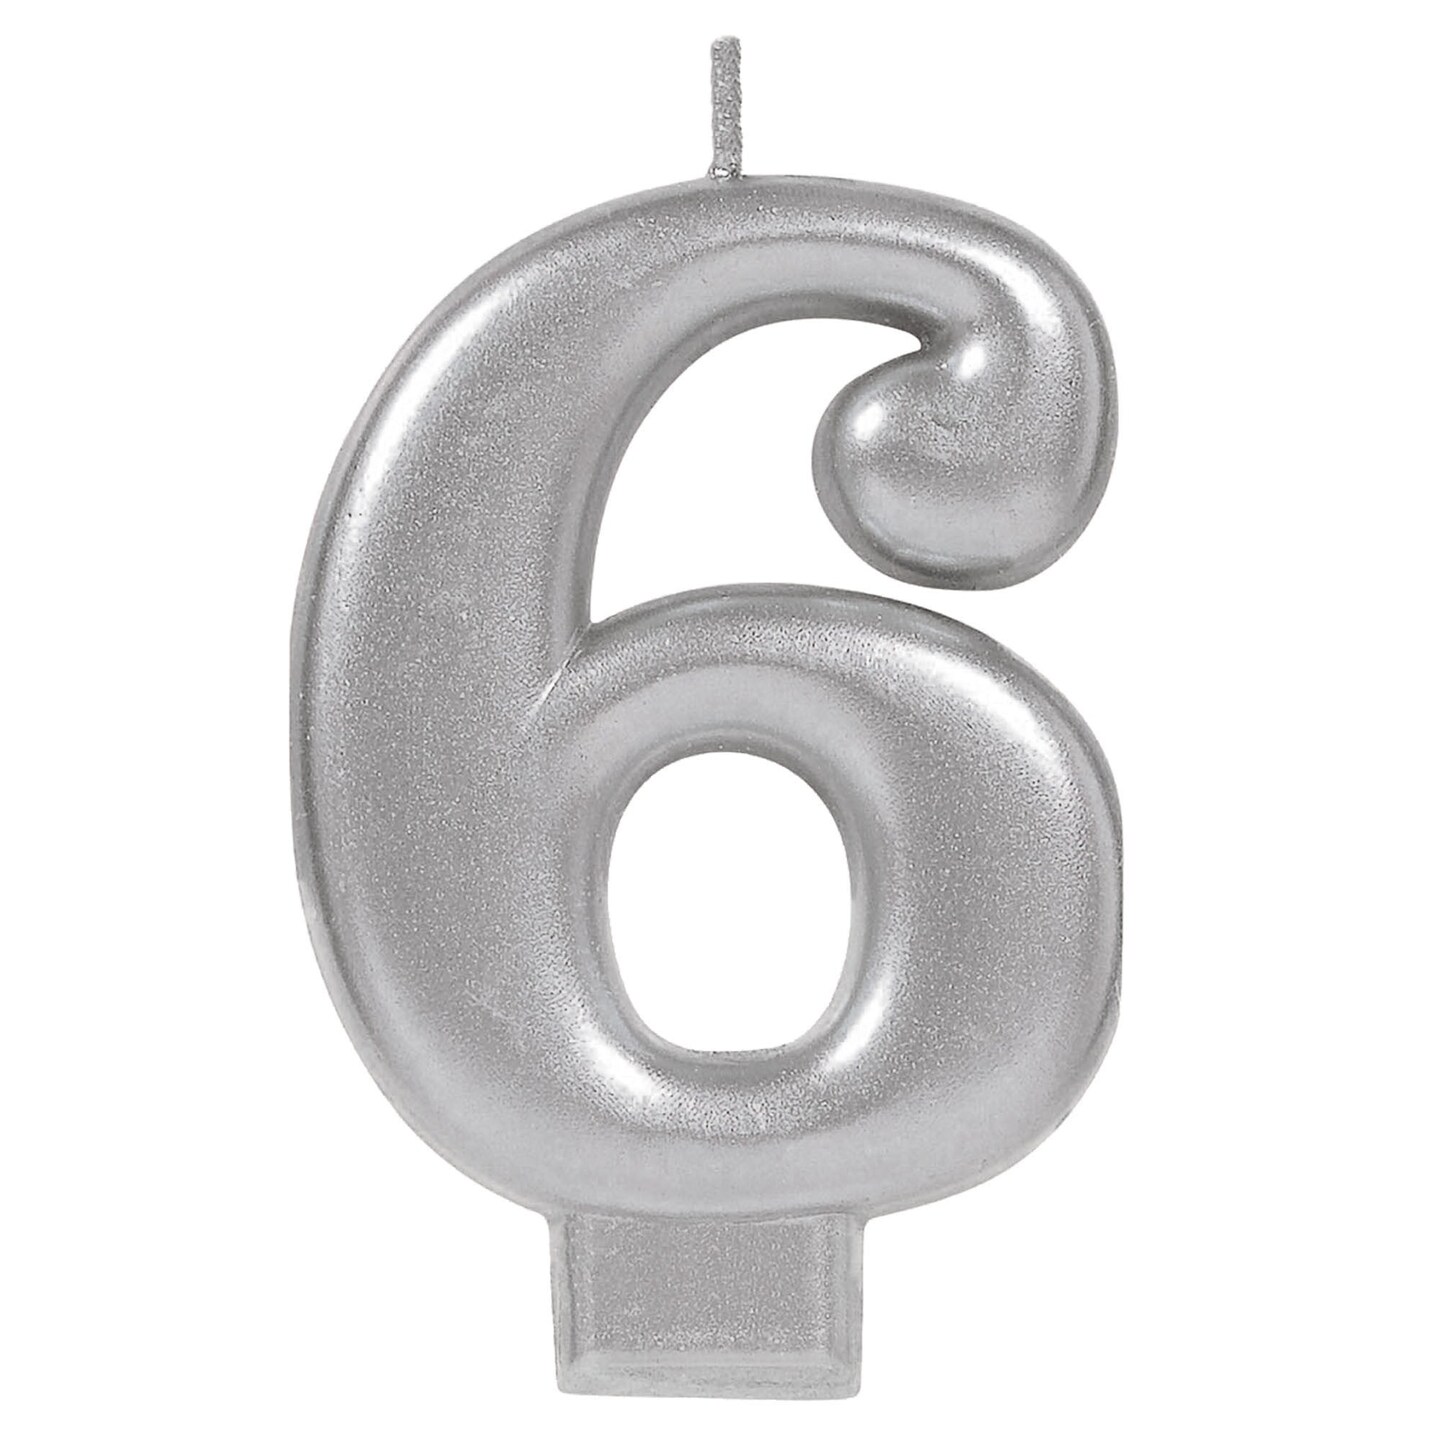 Numeral Metallic Birthday Candle #6 - Silver, 1ct